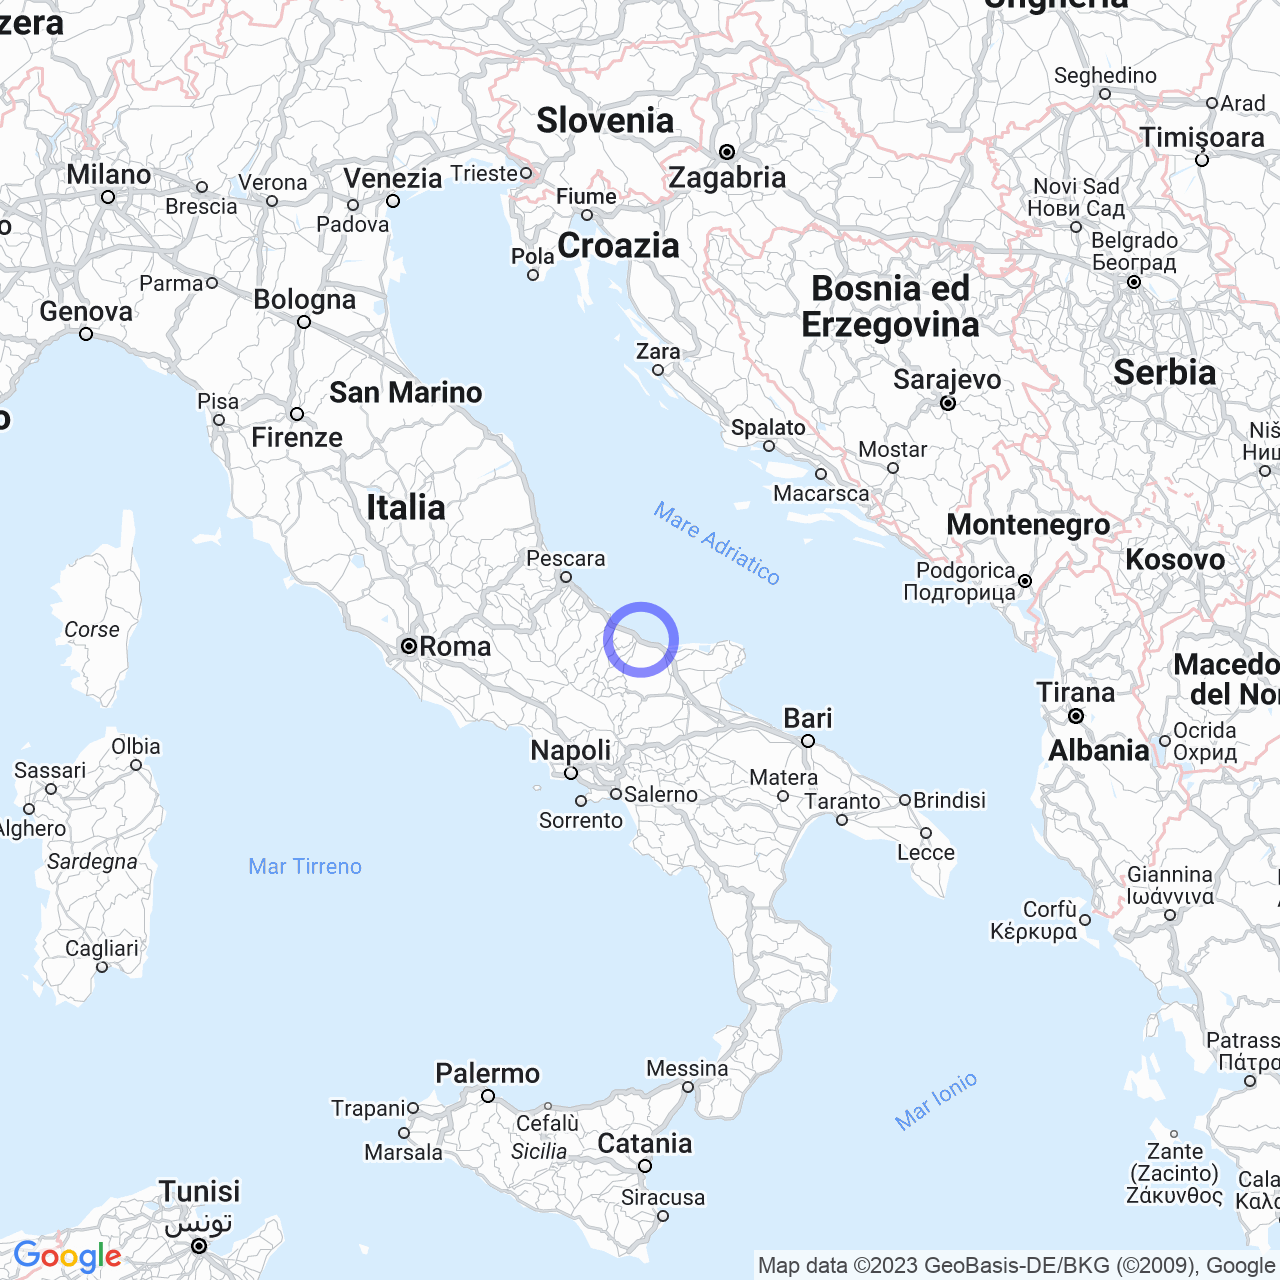 Province of Campobasso: among mountains, valleys, lakes, and sea.